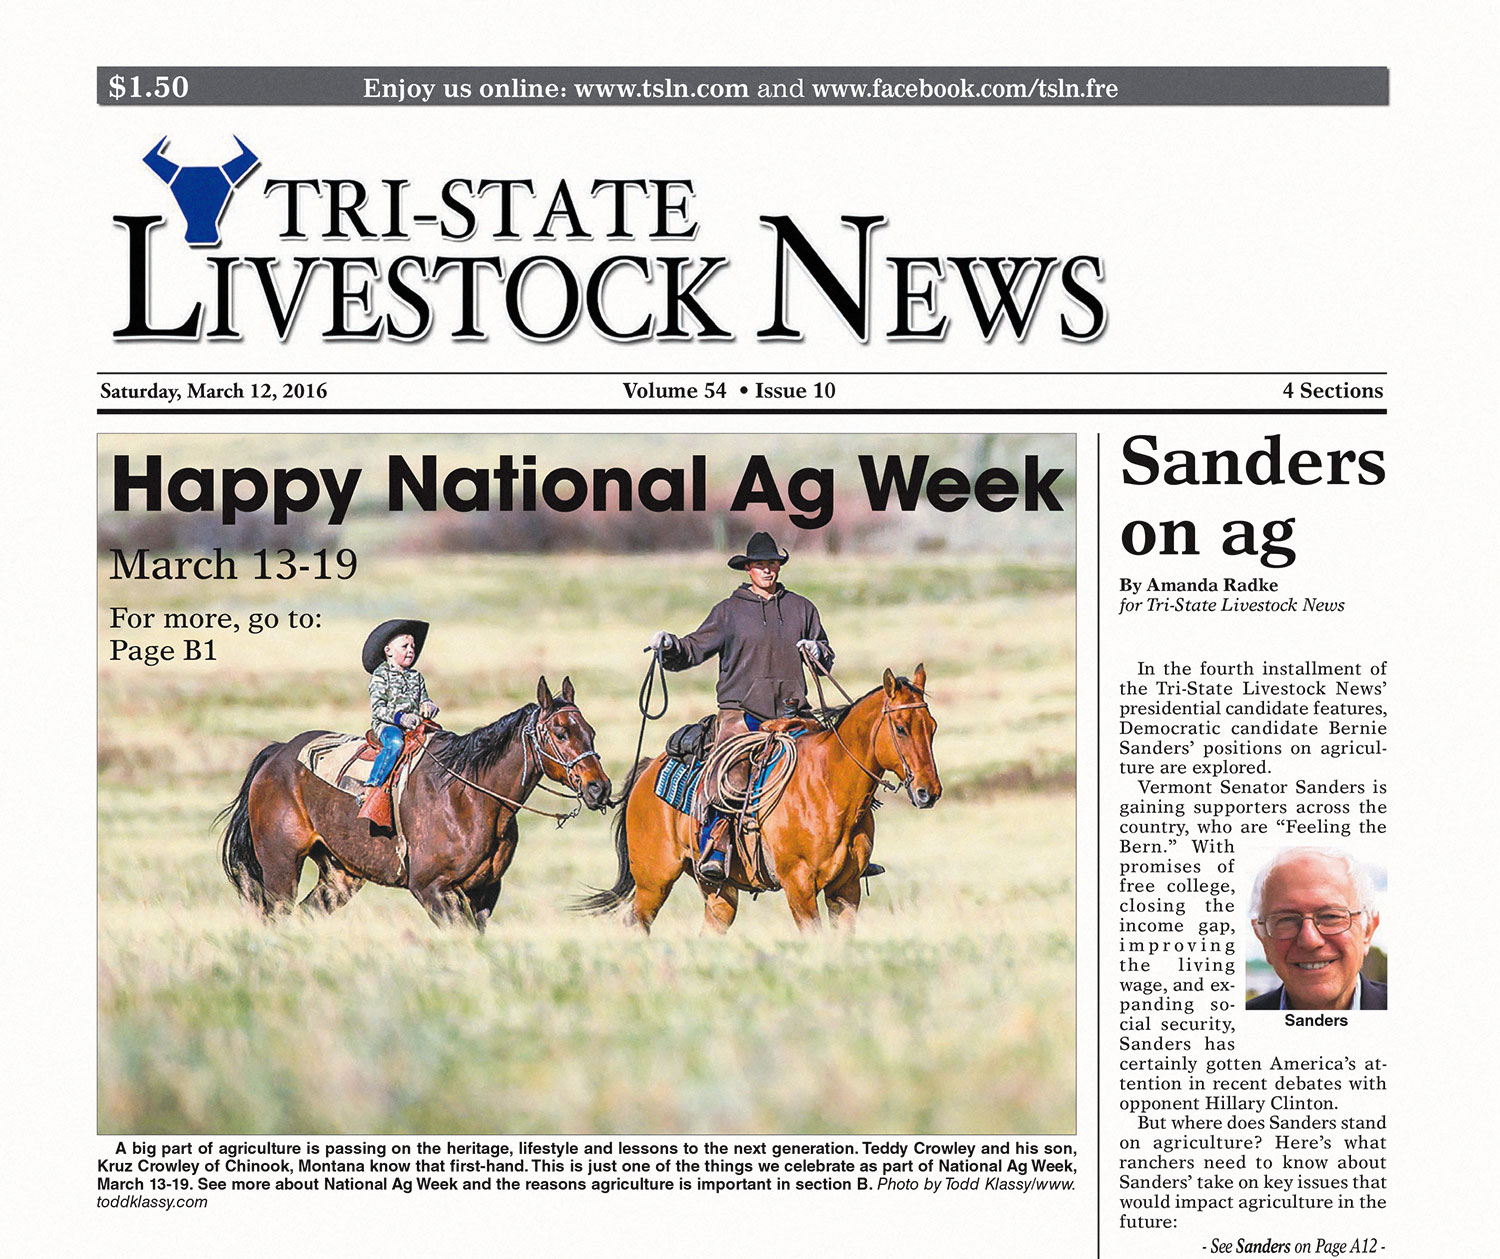 The front page of Tri-State Livestock News featuring my photo of Teddy Crowley and his son Kruz to celebrate National Ag Week. It appeared in the Mark 12, 2016 edition of the farm and ag newspaper.